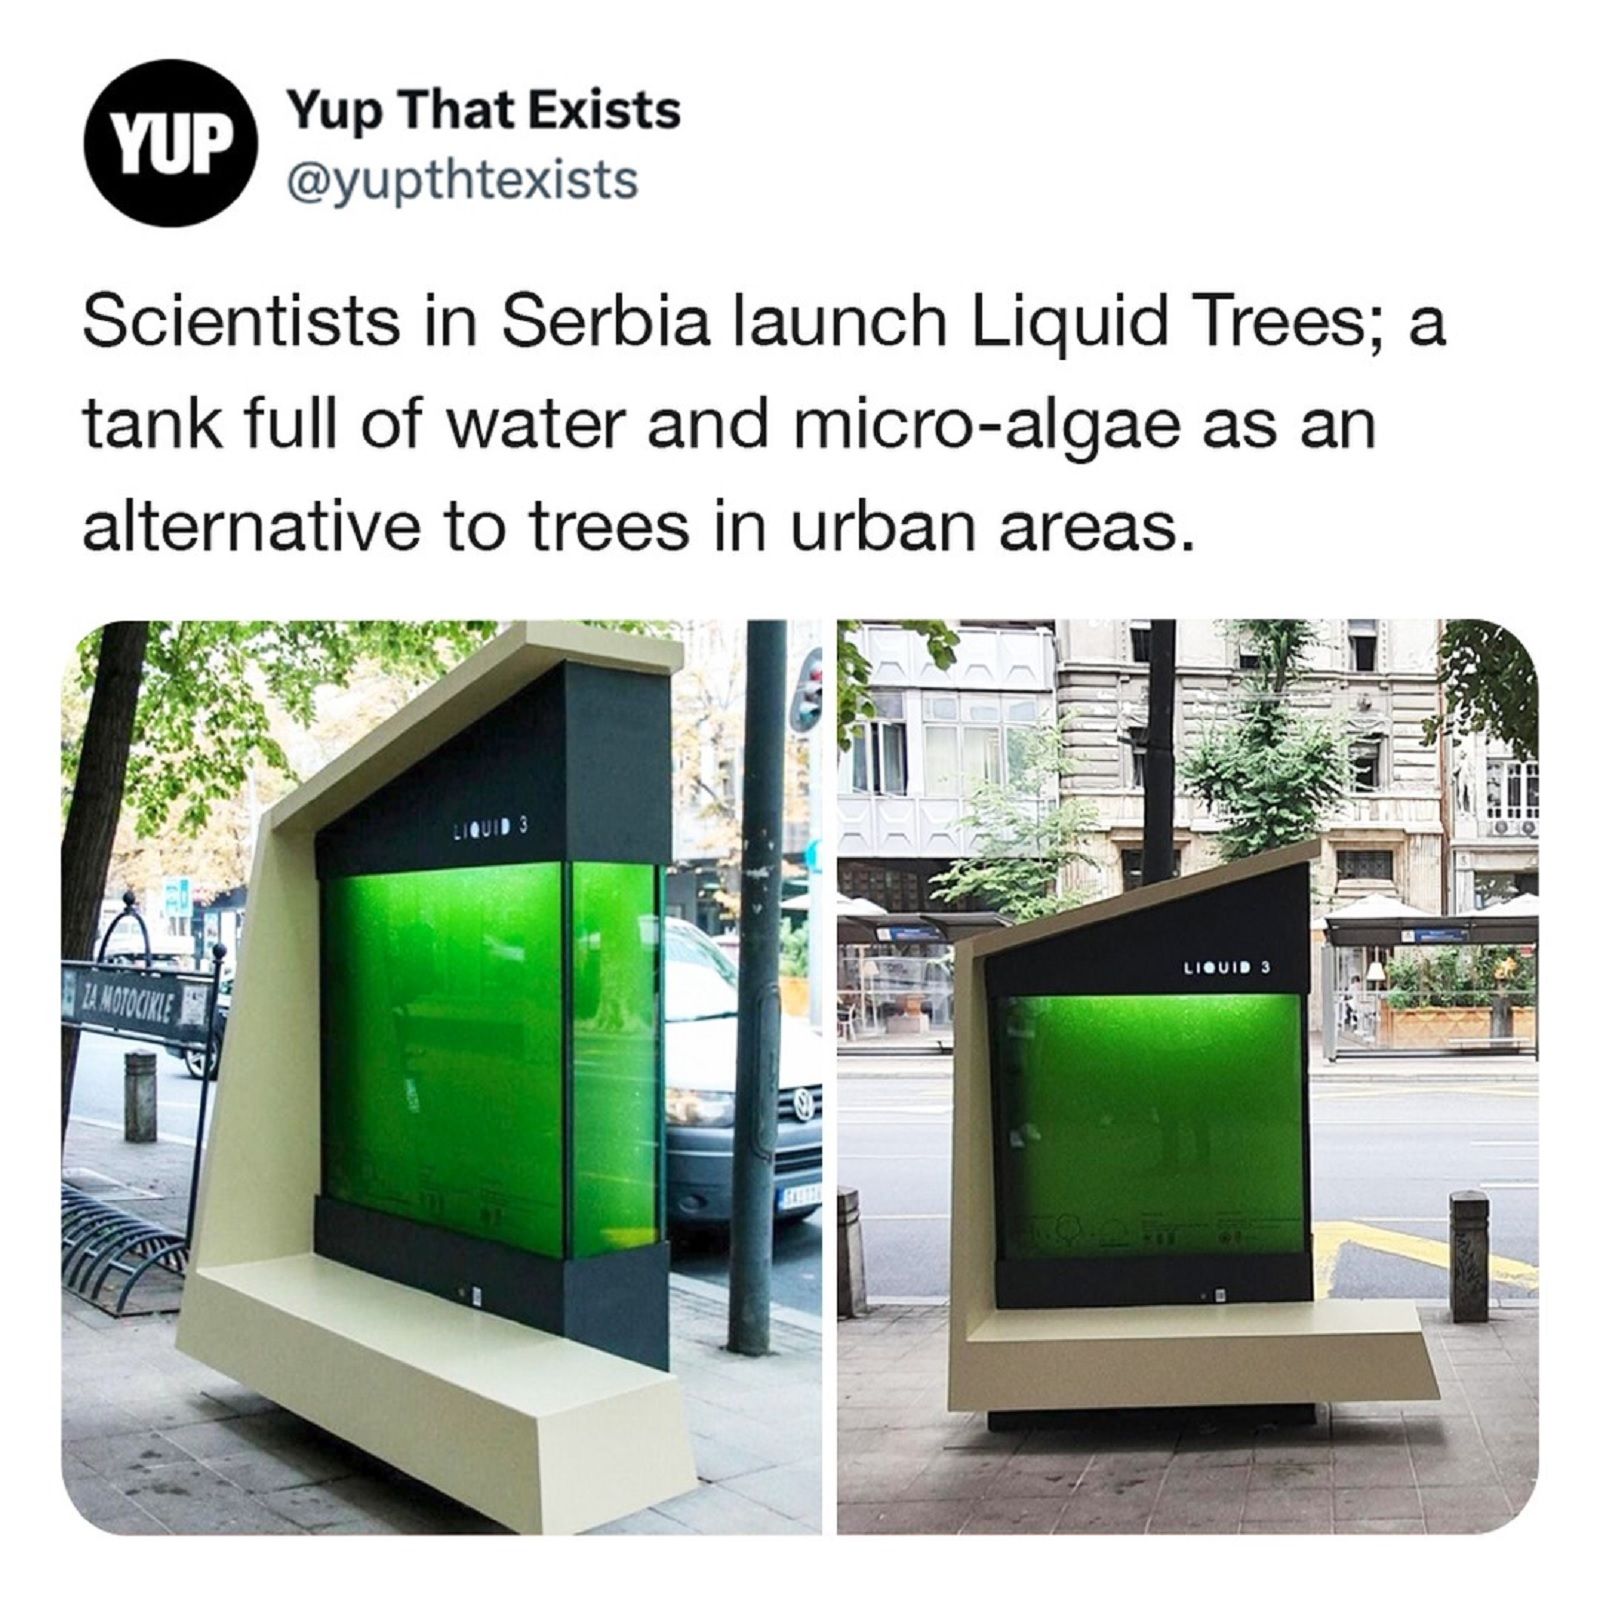 An alternative to trees